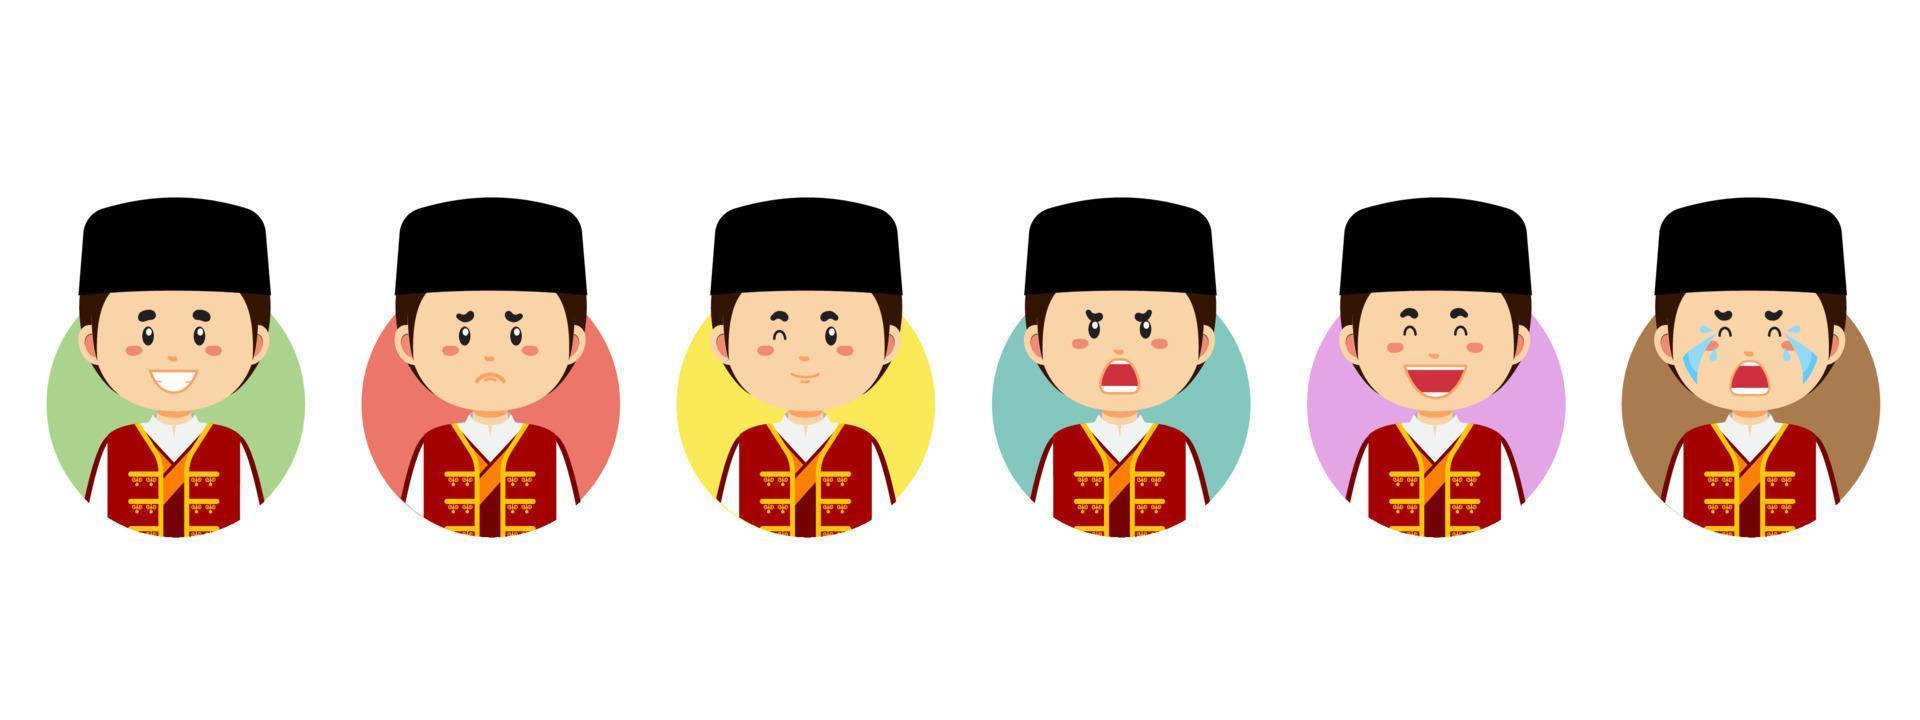 Montenegrins  Avatar with Various Expression vector